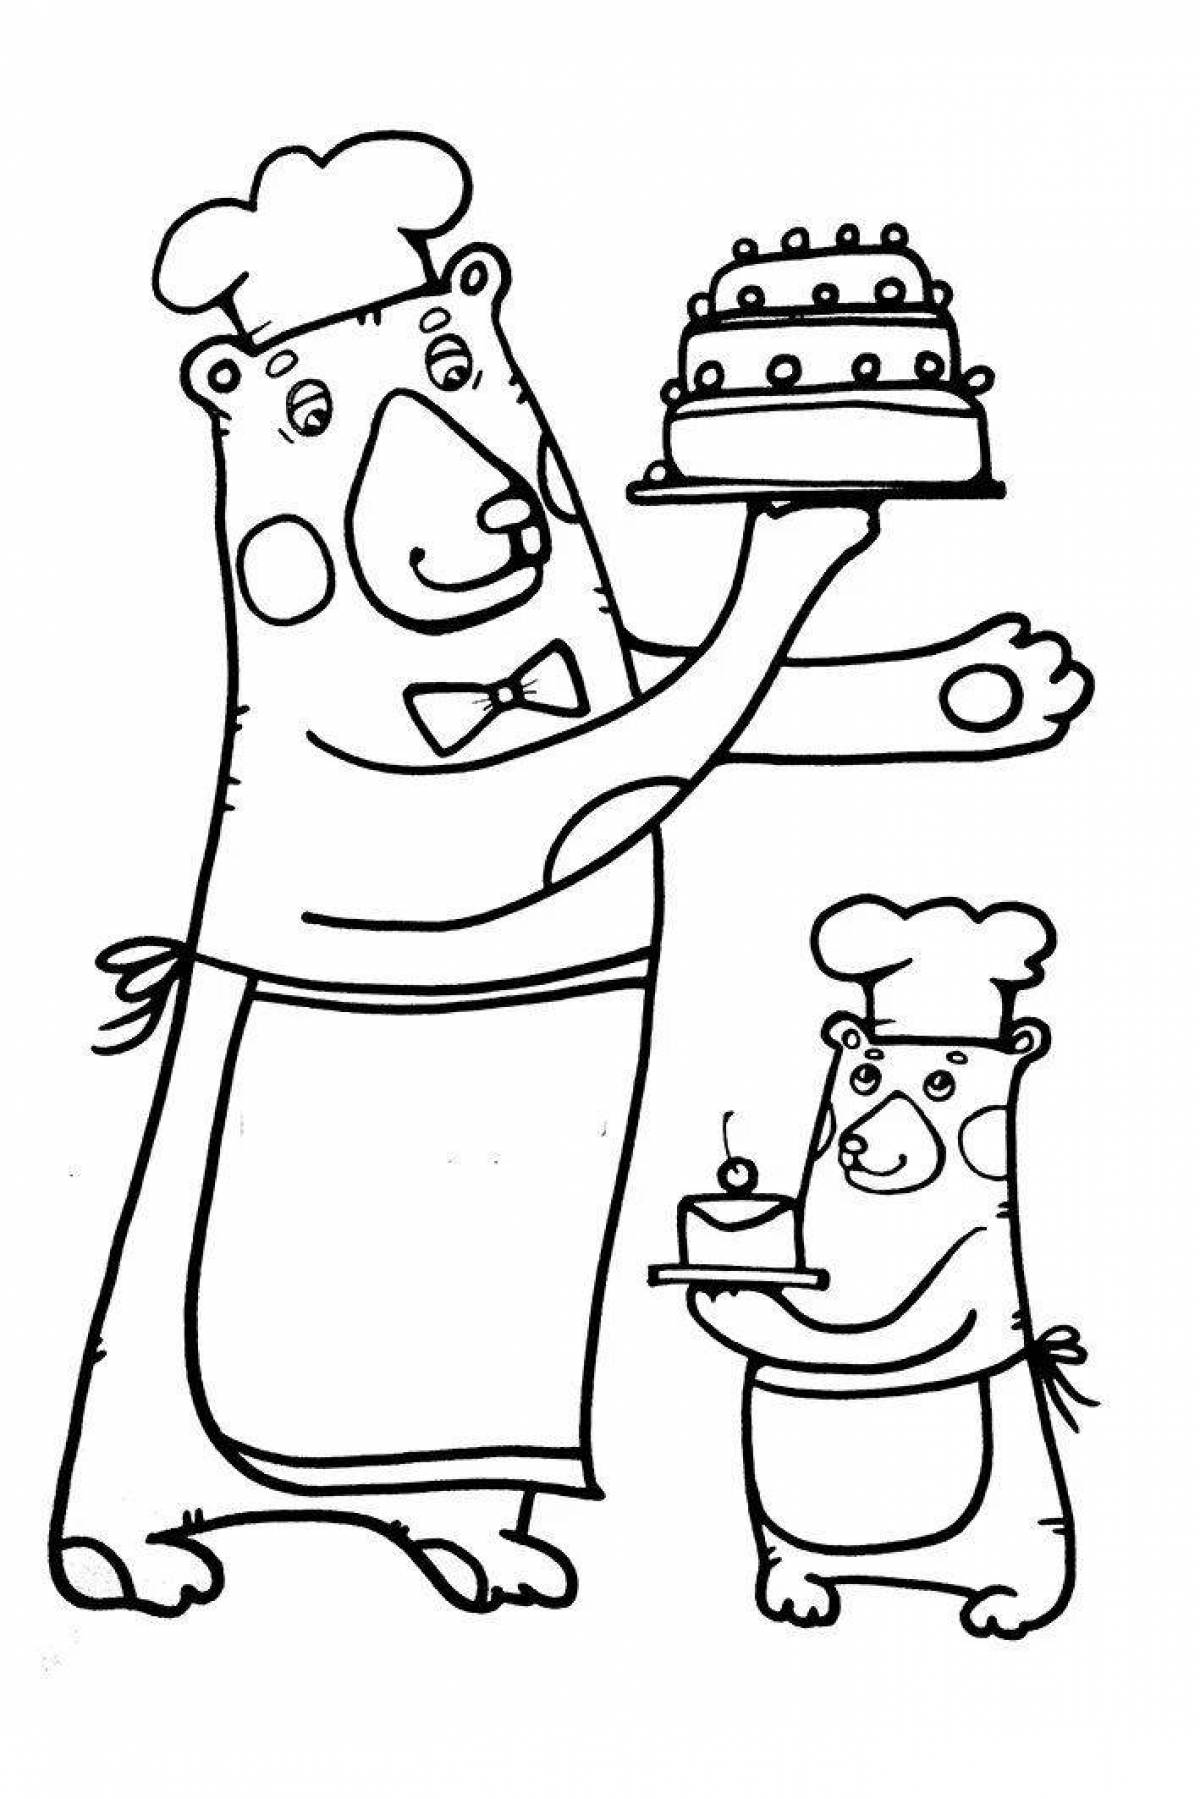 Fun pastry chef coloring book for kids